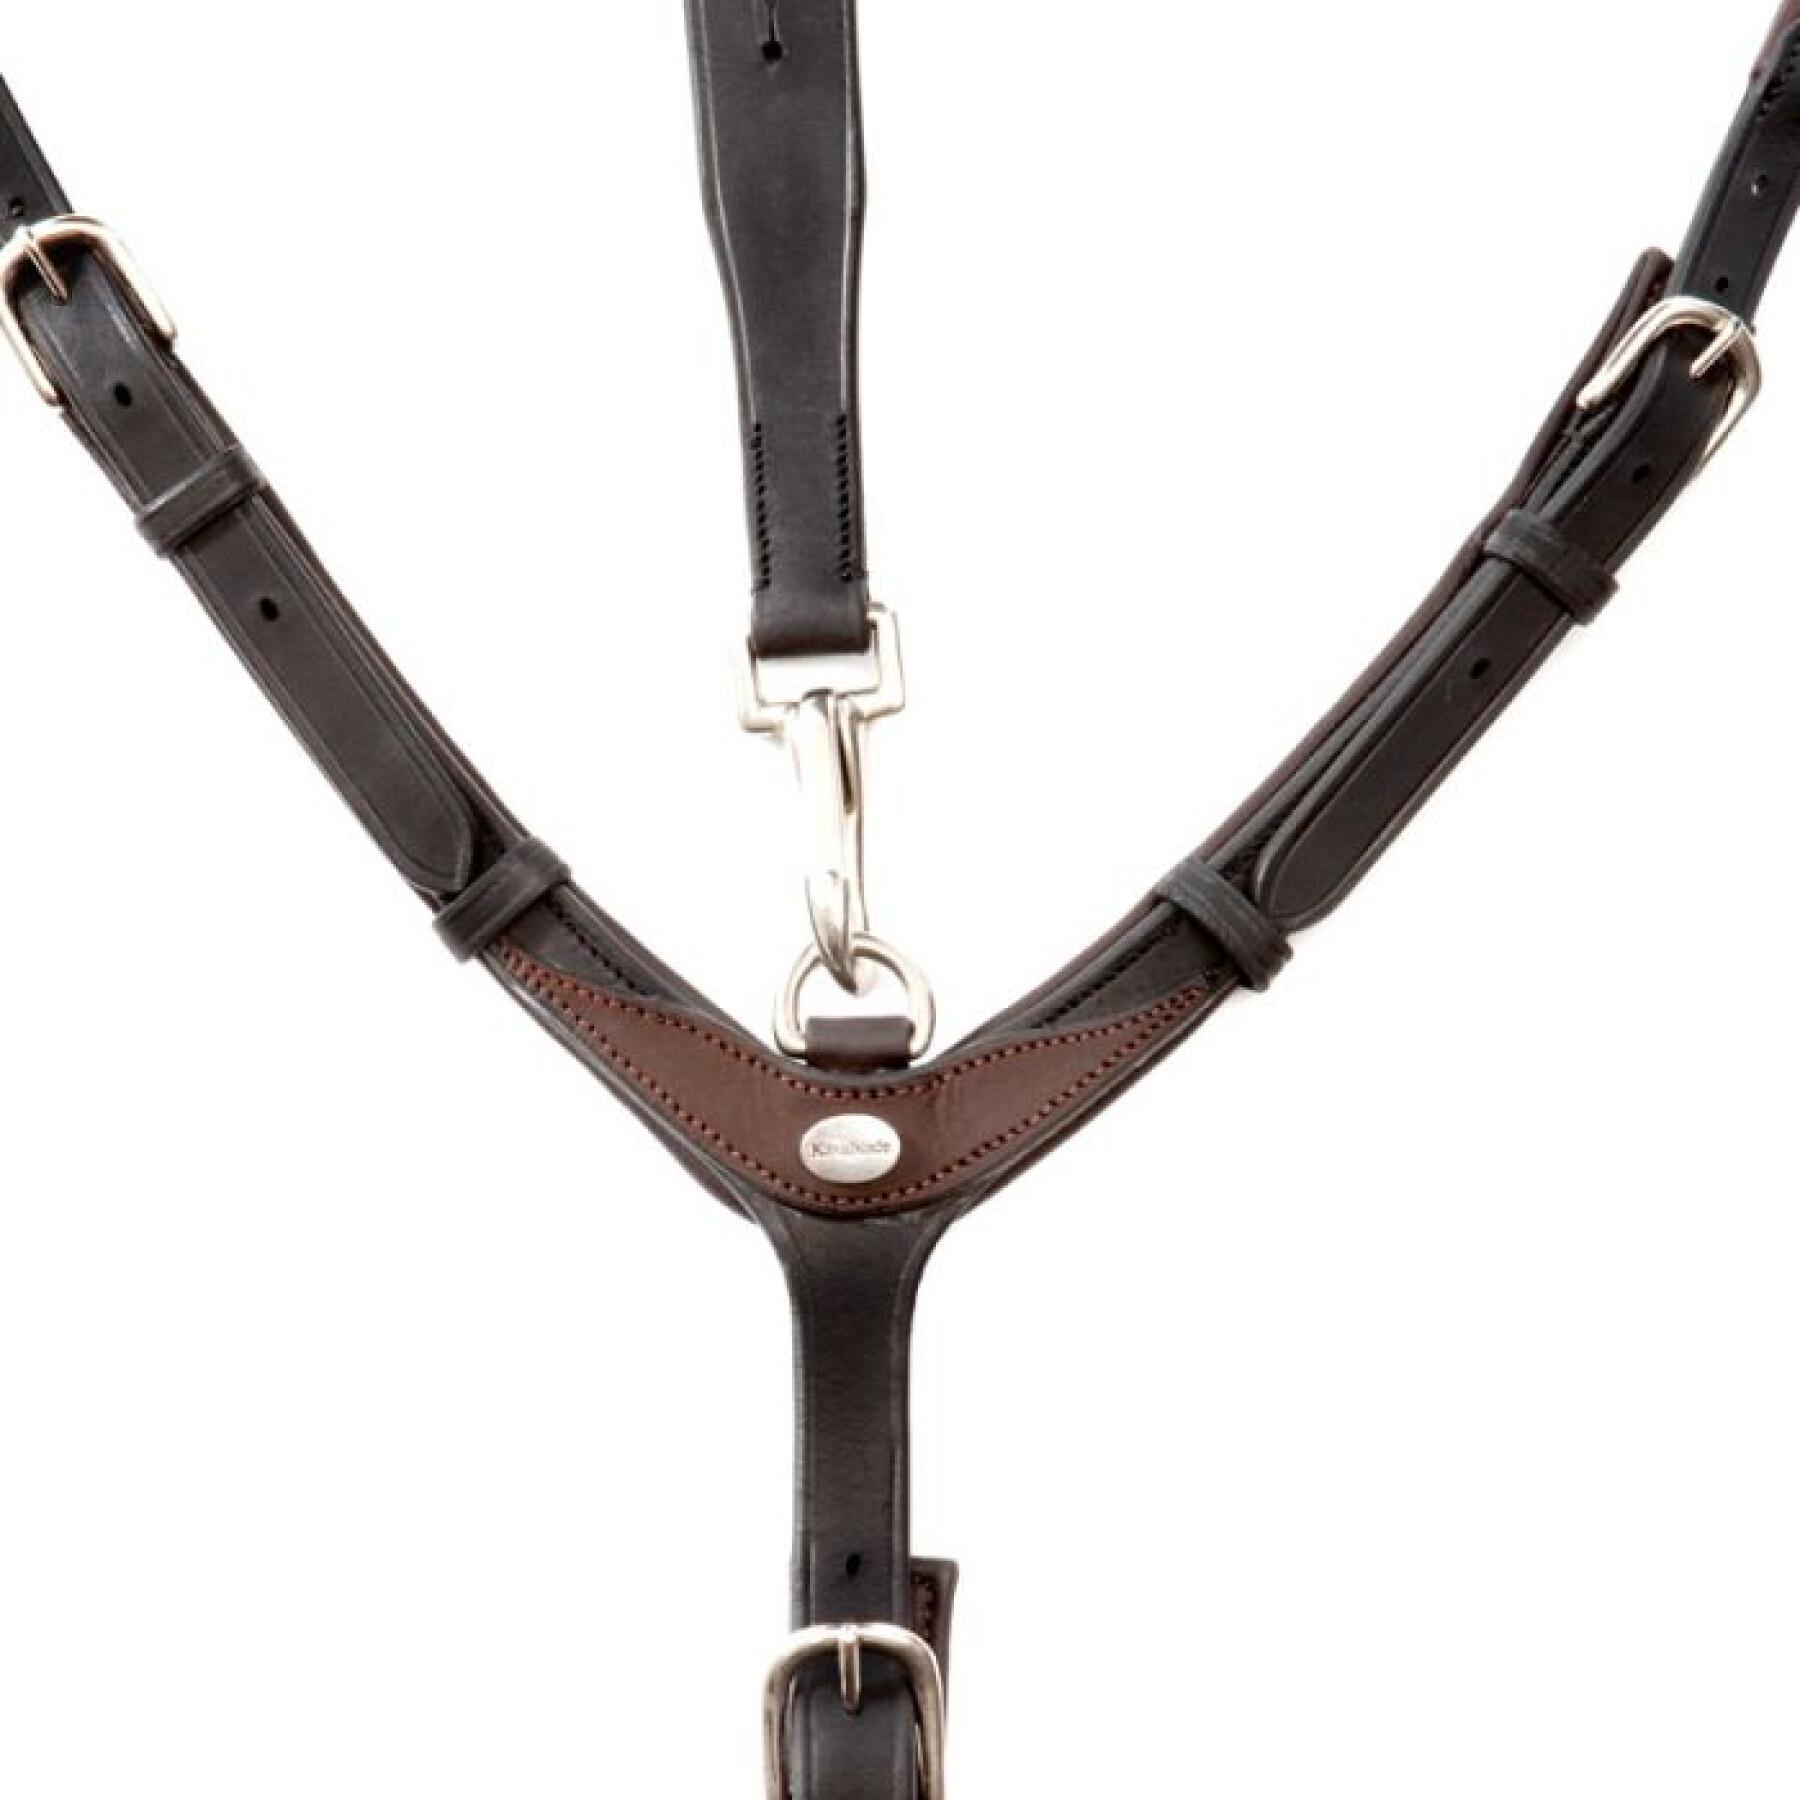 Collier de chasse pour cheval Kavalkade Everyday